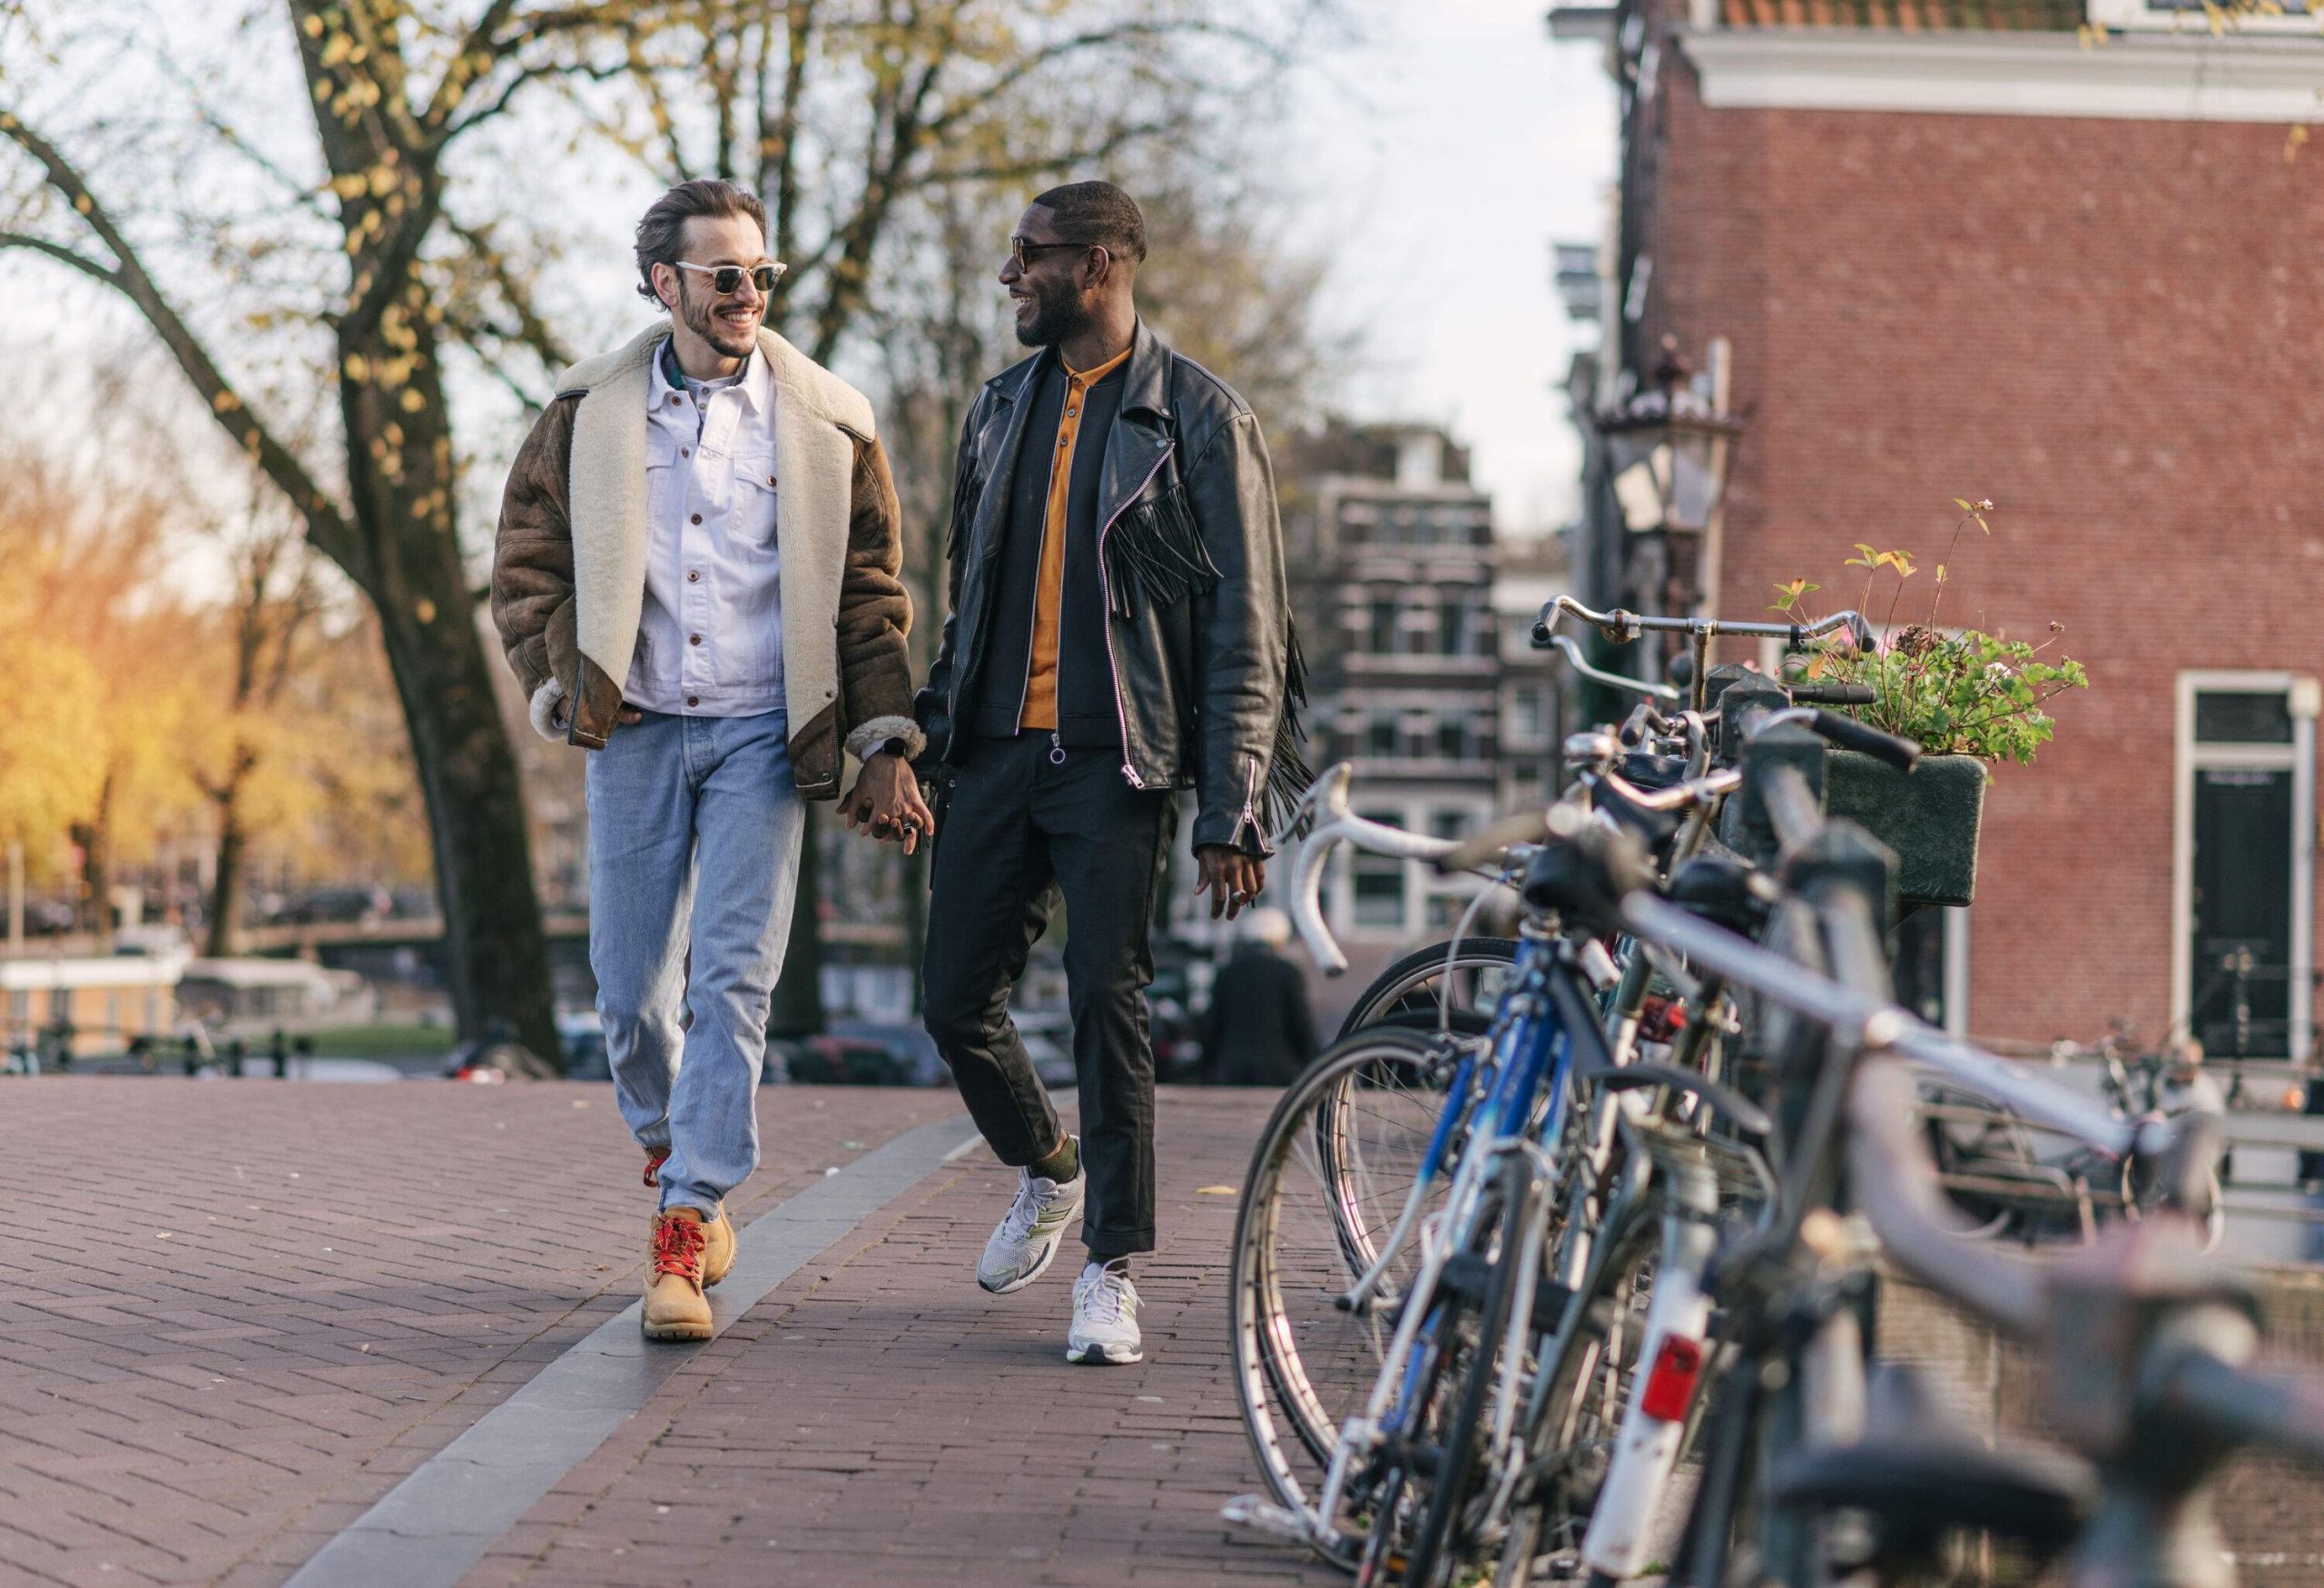 A gay couple in winter clothes walk hand in hand down a cobbled street lined with parked bicycles.